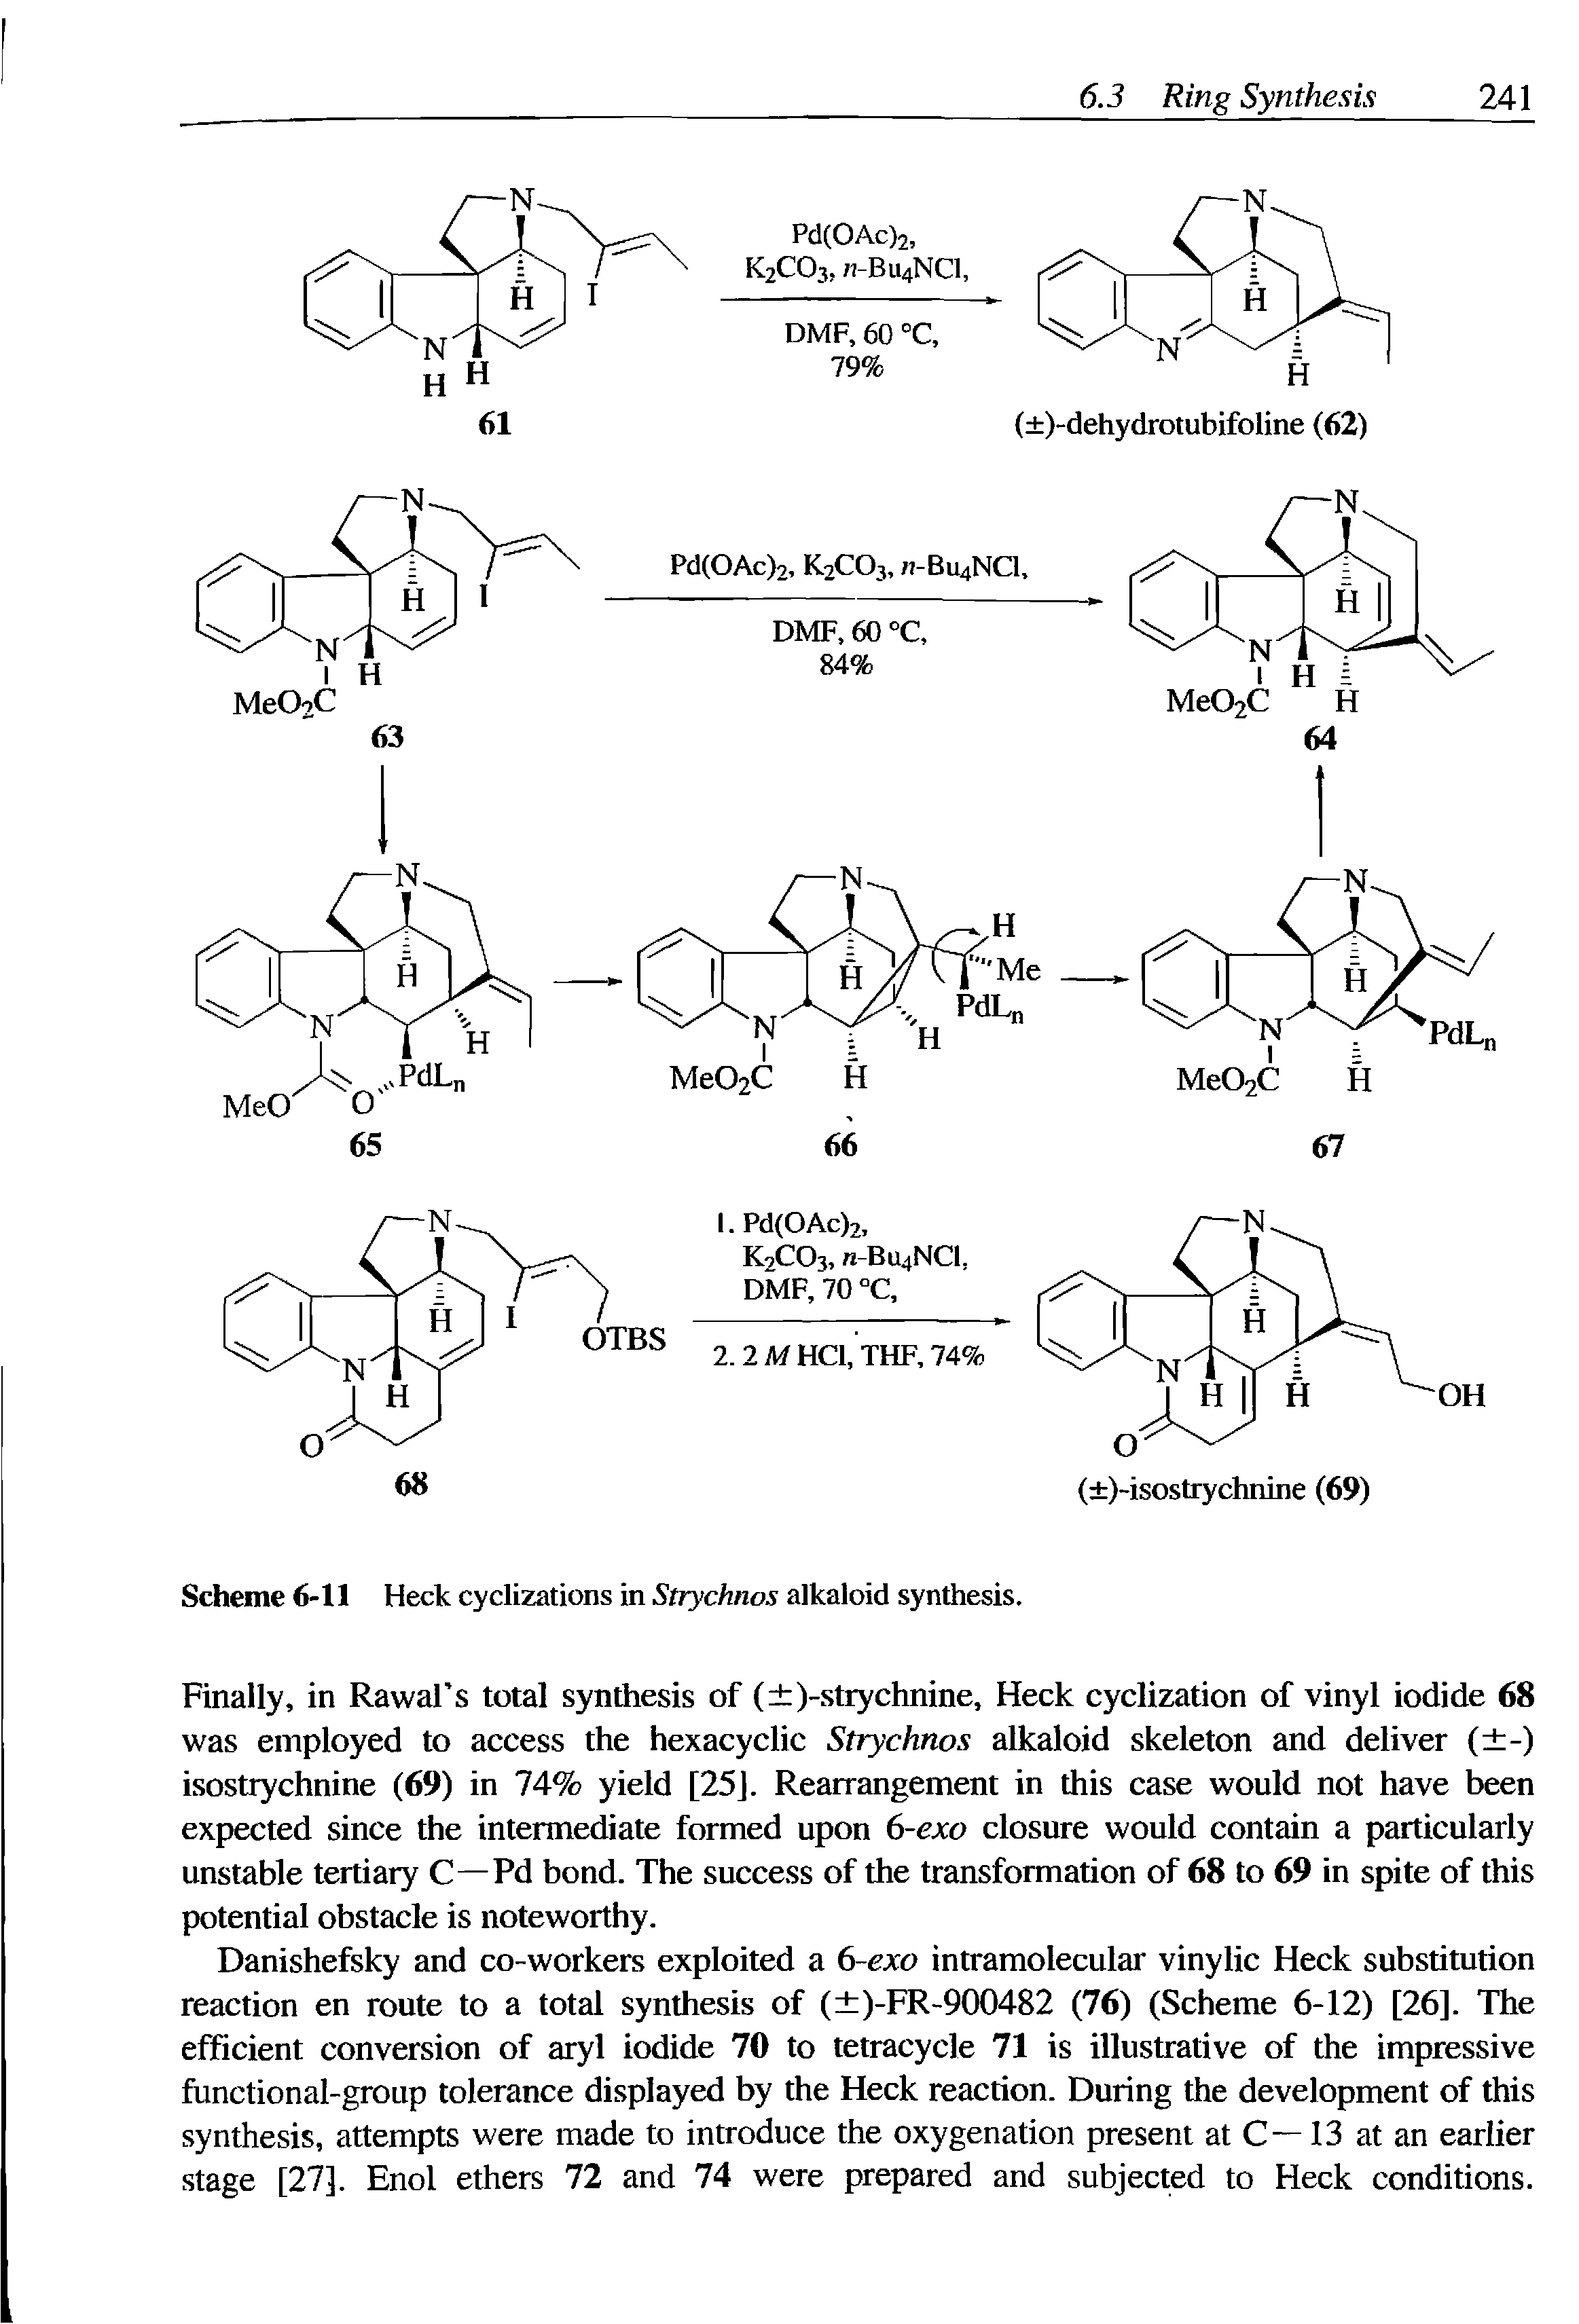 Scheme 6-11 Heck cyclizations in Strychnos alkaloid synthesis.